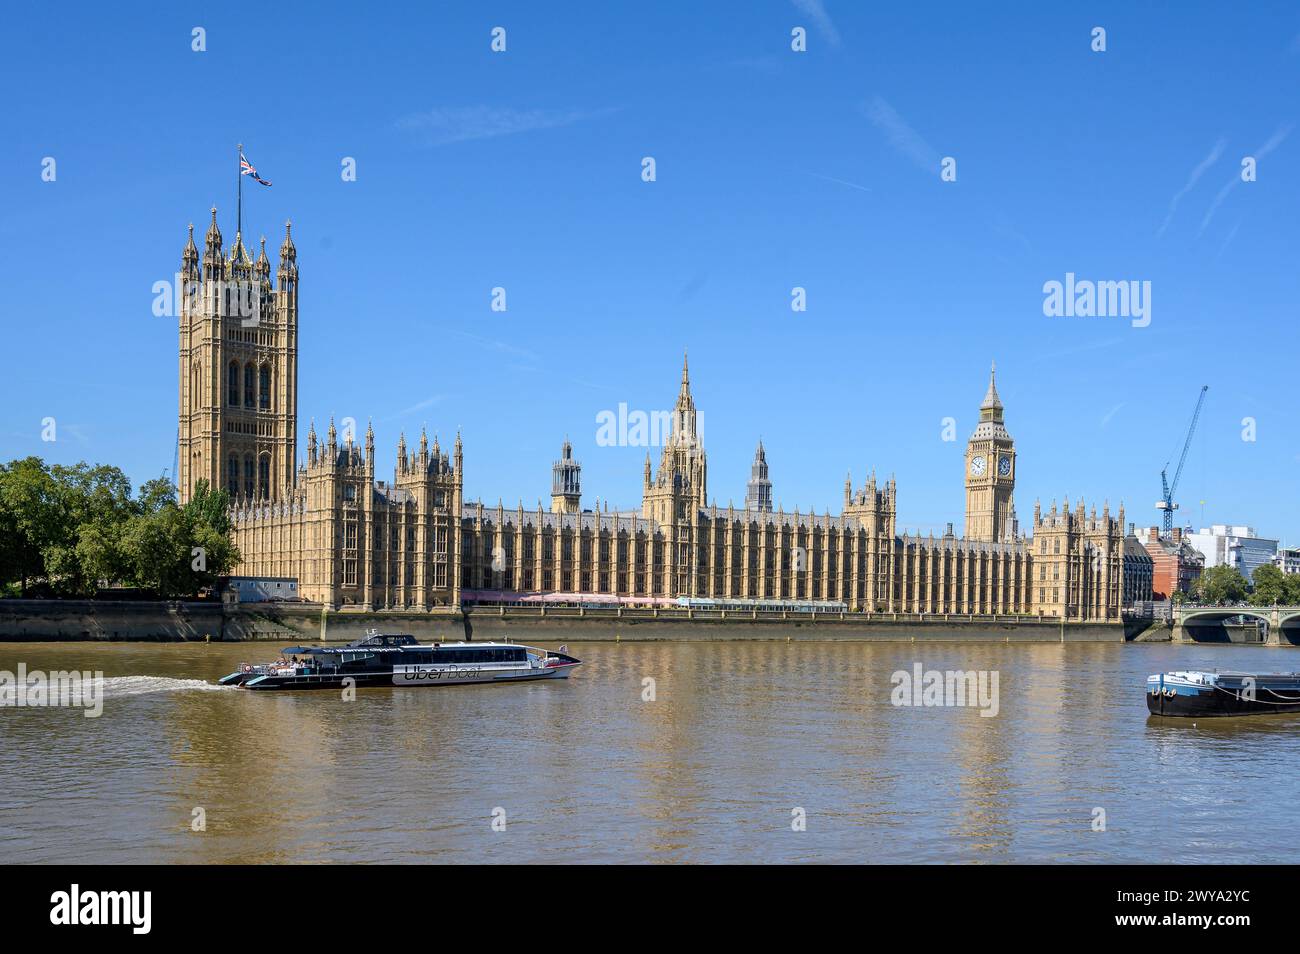 Uber Boot vorbei am Palace of Westminster, London, England. Stockfoto